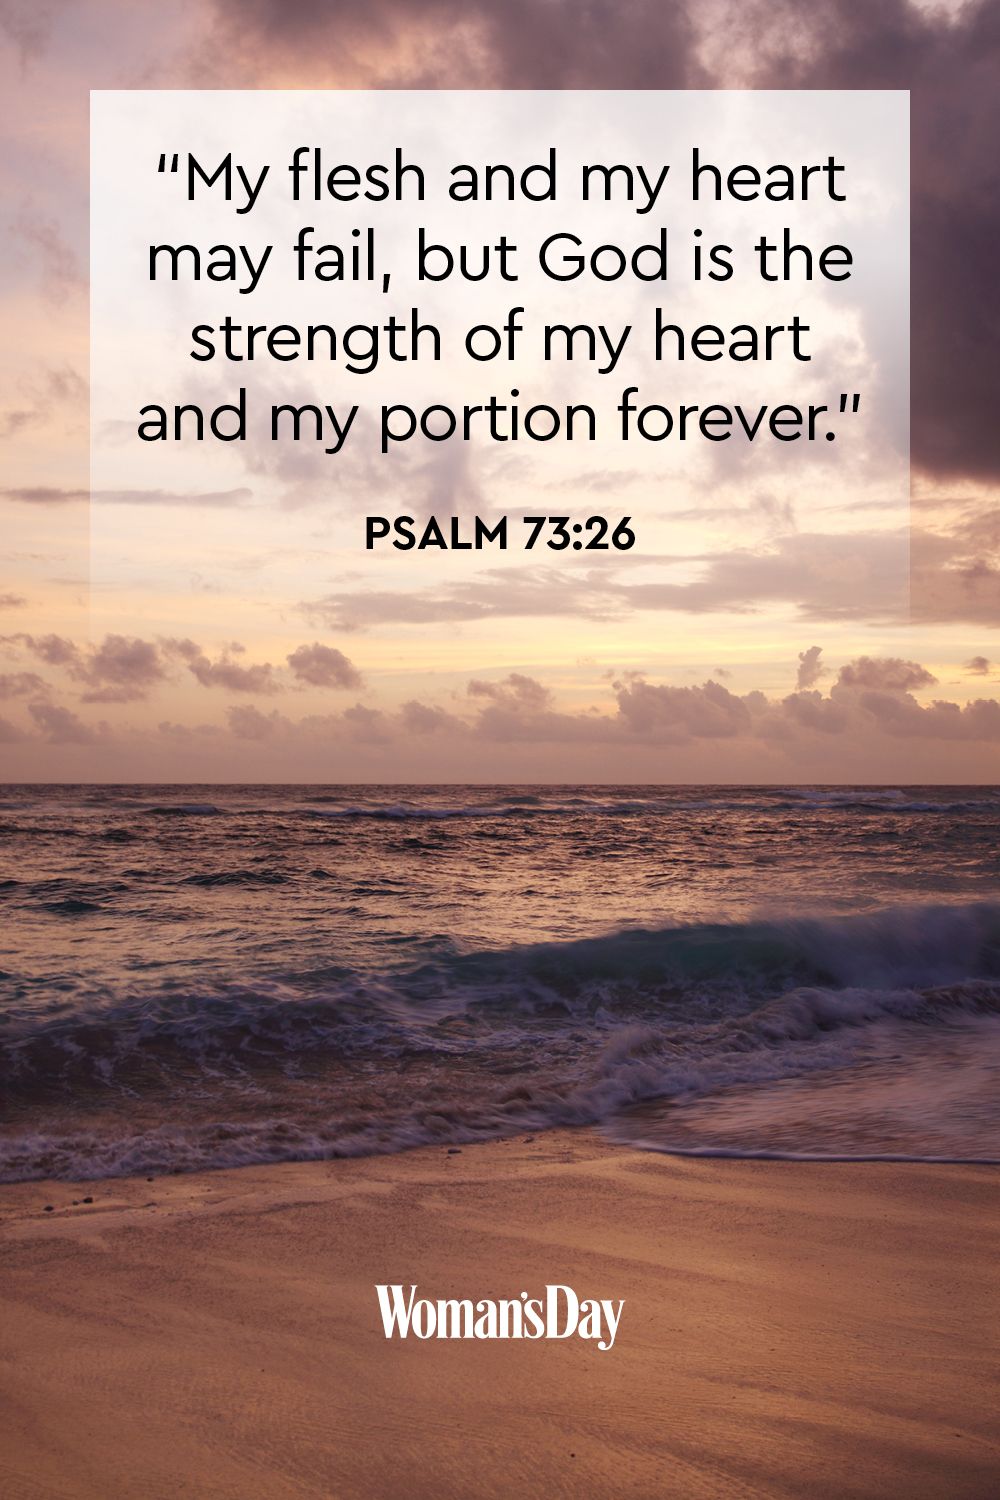 bible verse about strength and encouragement